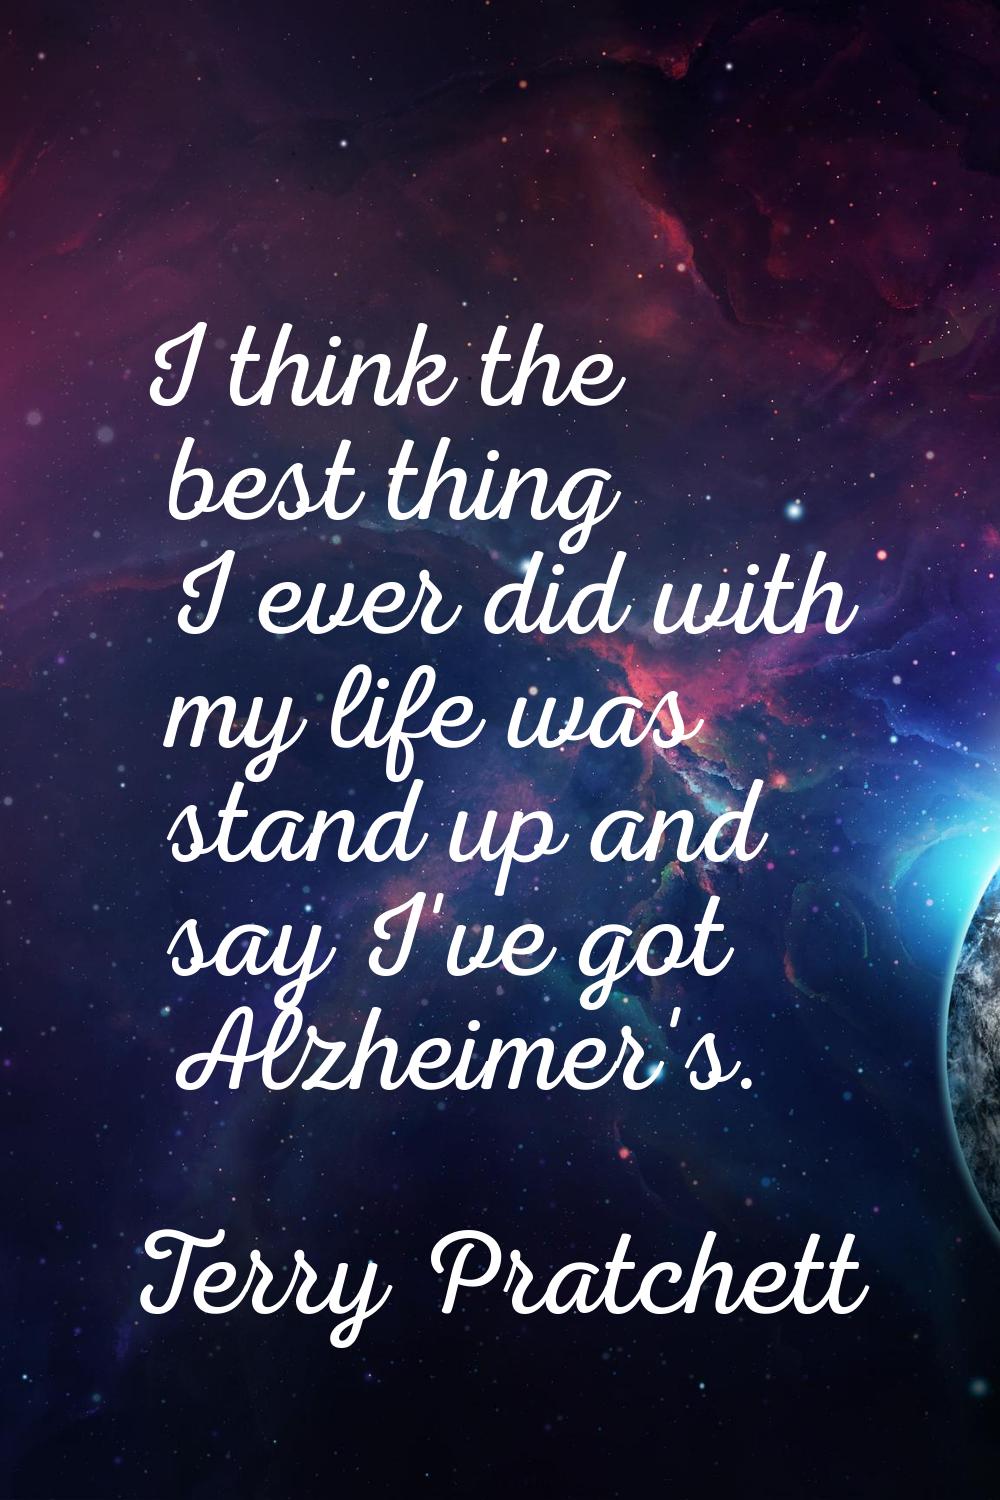 I think the best thing I ever did with my life was stand up and say I've got Alzheimer's.